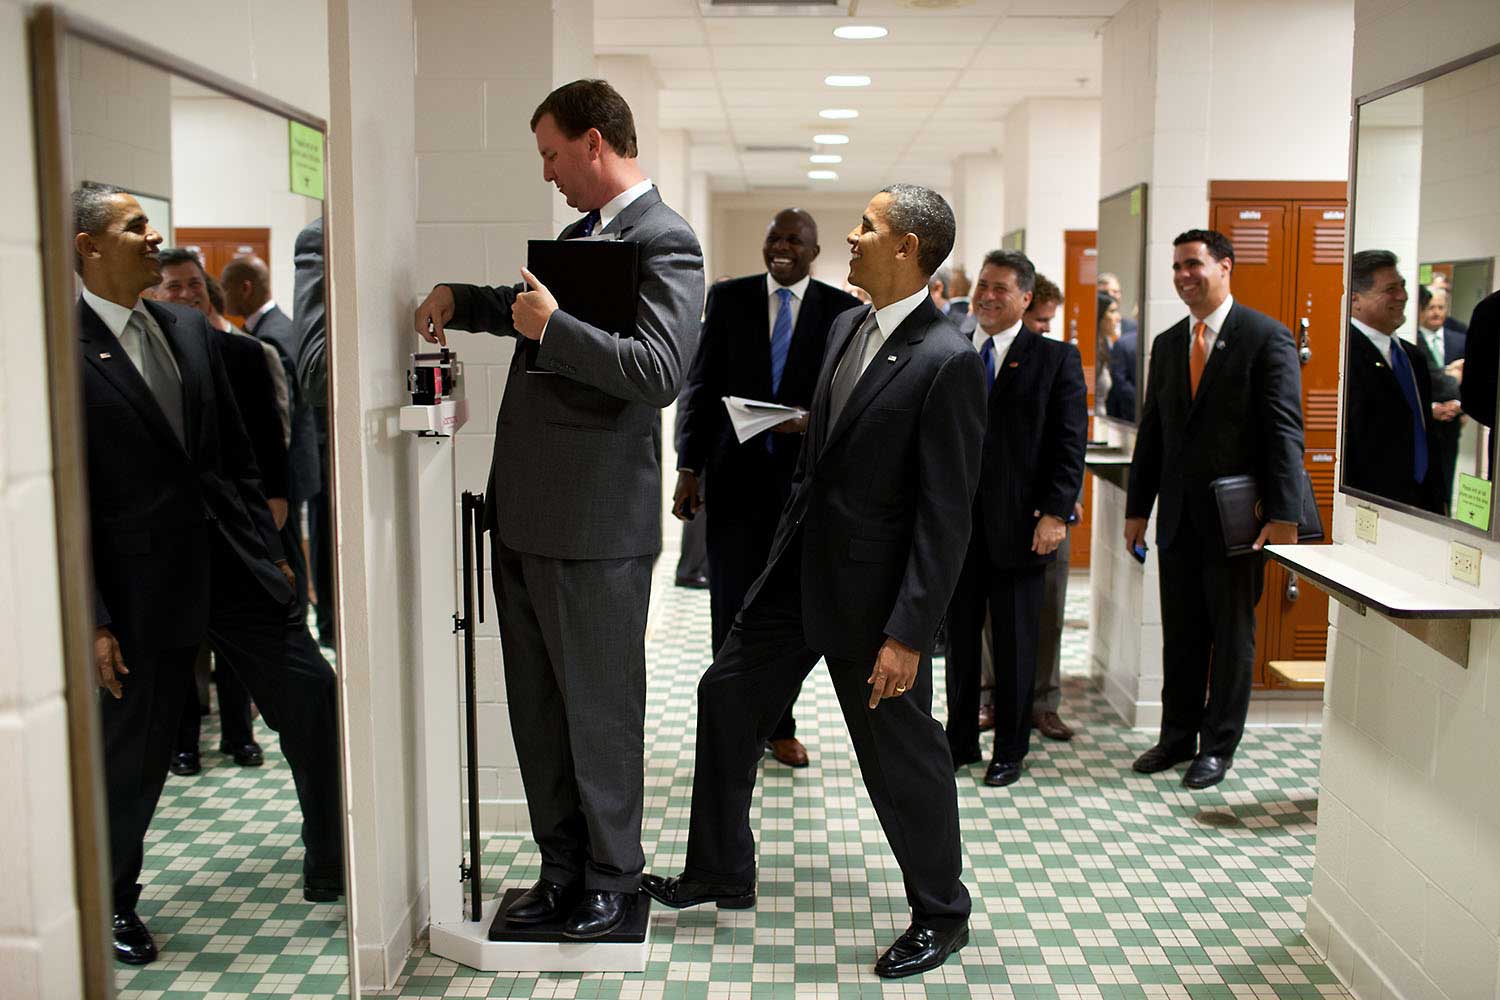 "We were walking through a locker room at the University of Texas on August 9, 2010, when White House Trip Director Marvin Nicholson stopped to weigh himself on a scale. Unbeknownst to him, the President was stepping on the back of the scale, as Marvin continued to slide the scale lever. Everyone but Marvin was in on the joke."